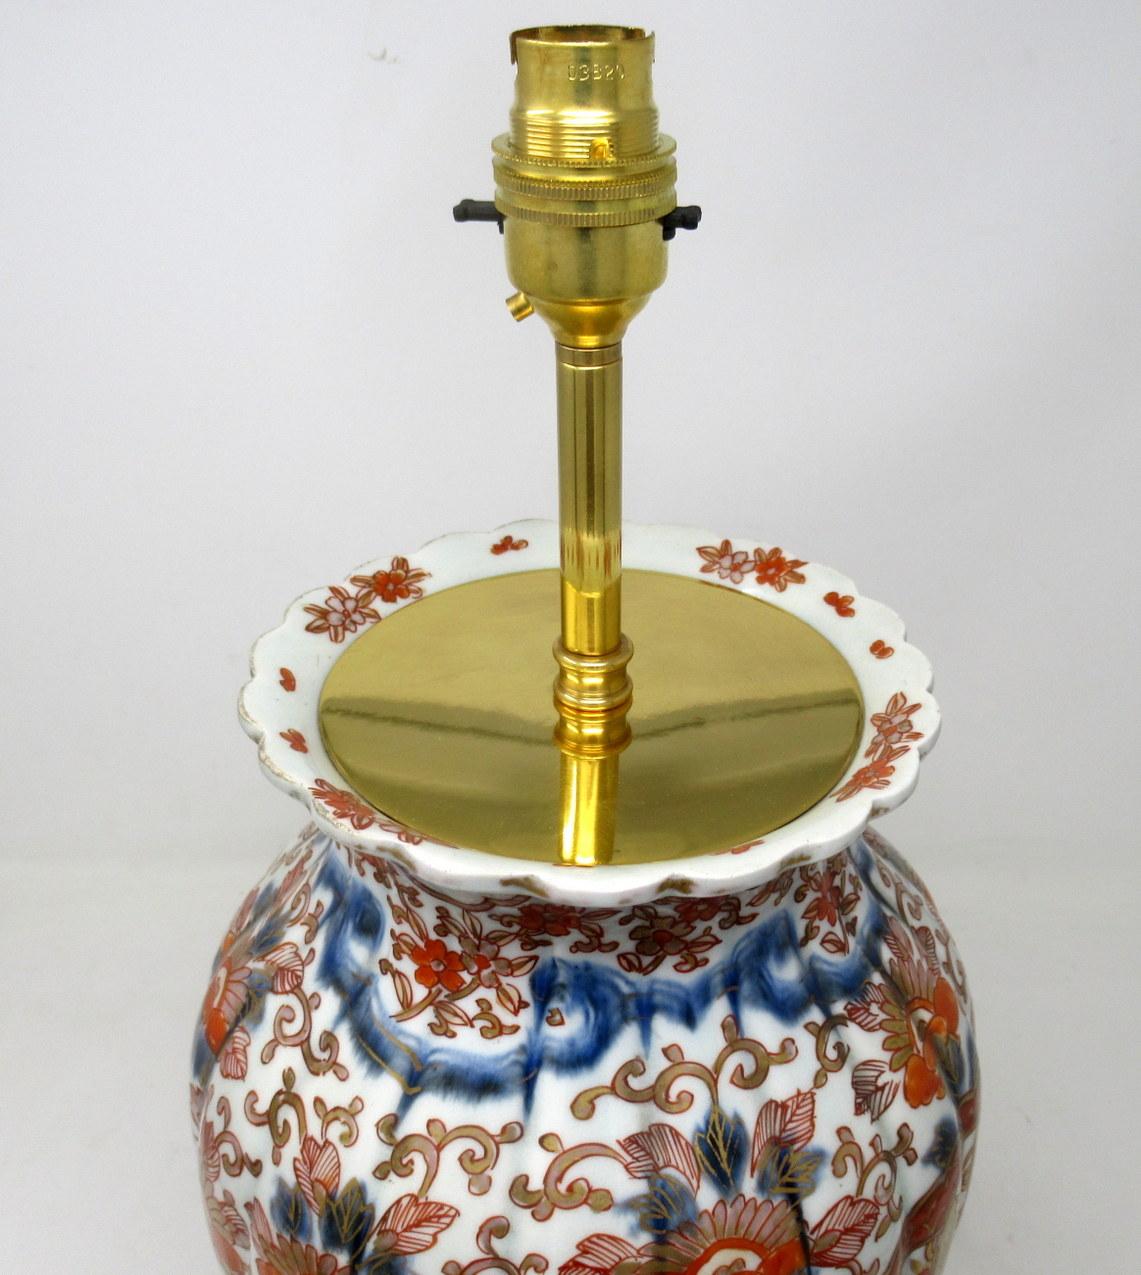 Antique Pair Japanese Chinese Imari Porcelain Ormolu Table Lamps Blue Red Gilt 2